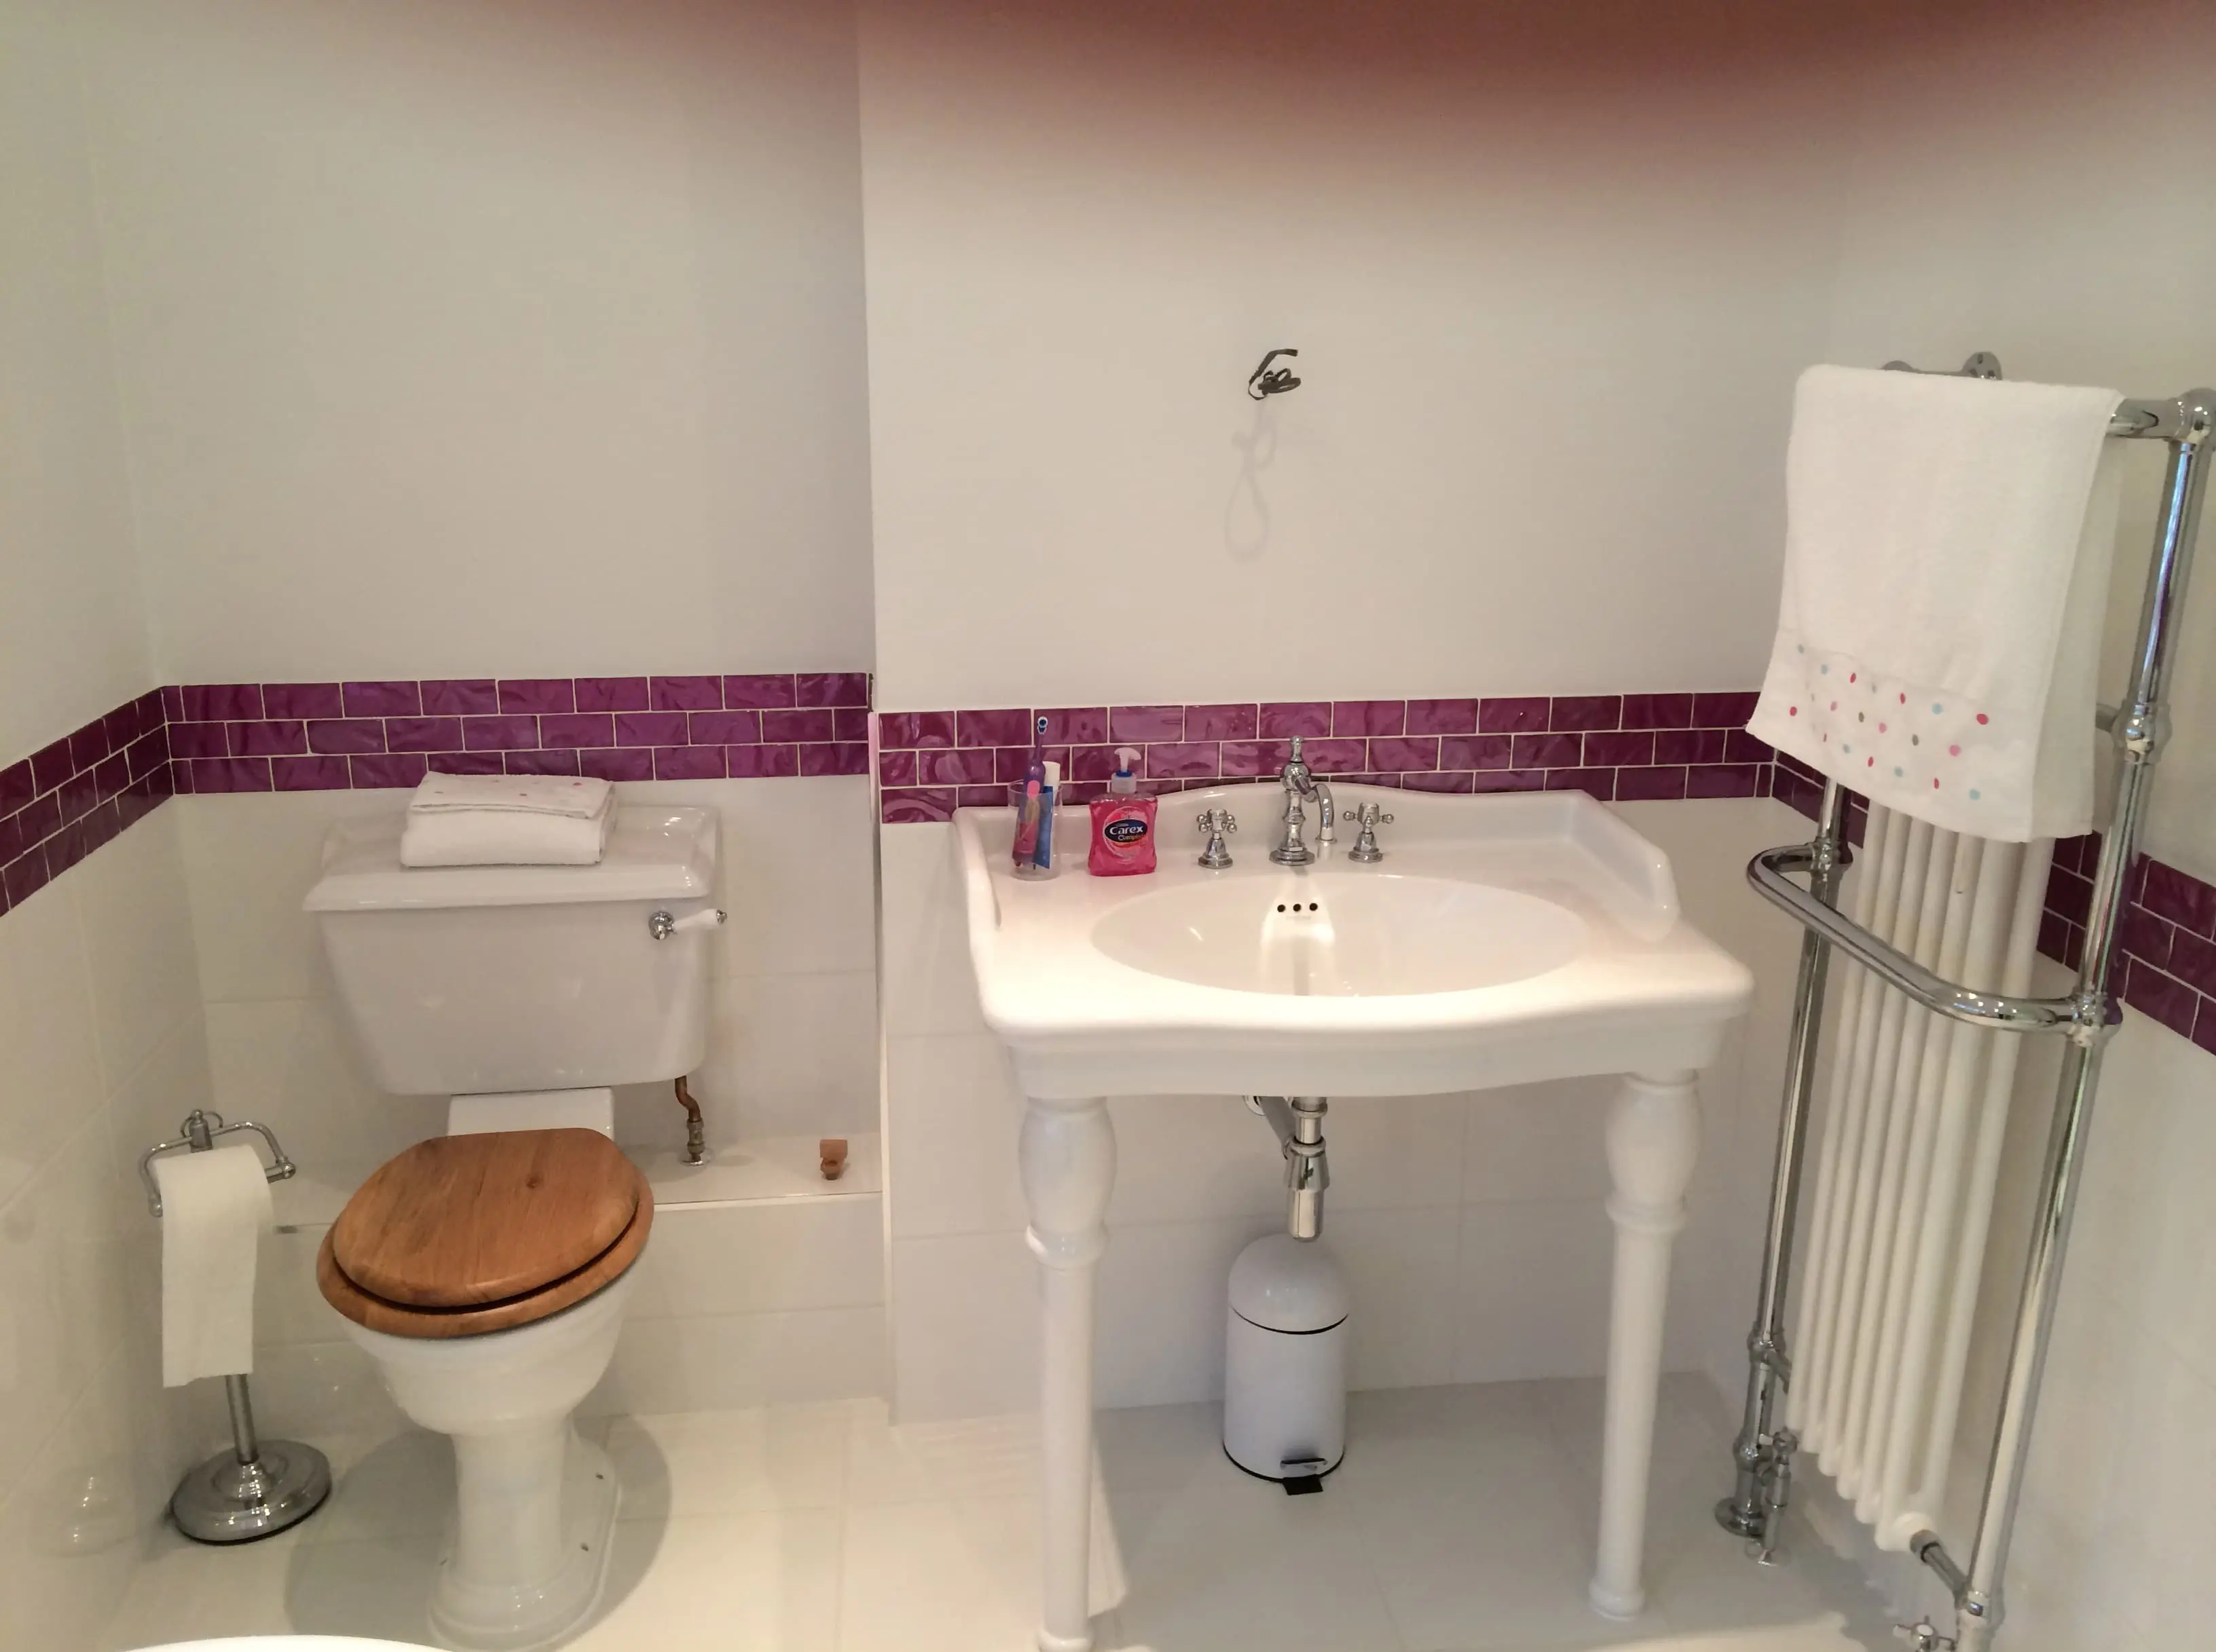 At Plumbing 4 U, we can tailor our tiling services&nbsp;to suit your budget.The team are fully qualified, with over 40 years of experience in the tiling industry, so you can be sure you are in good hands.&nbsp;In addition to tiling, we also offer plumbing and&nbsp;bathroom&nbsp;installations.Why not give us a&nbsp;call today to discuss your requirements for&nbsp;tiling services in Whitley?